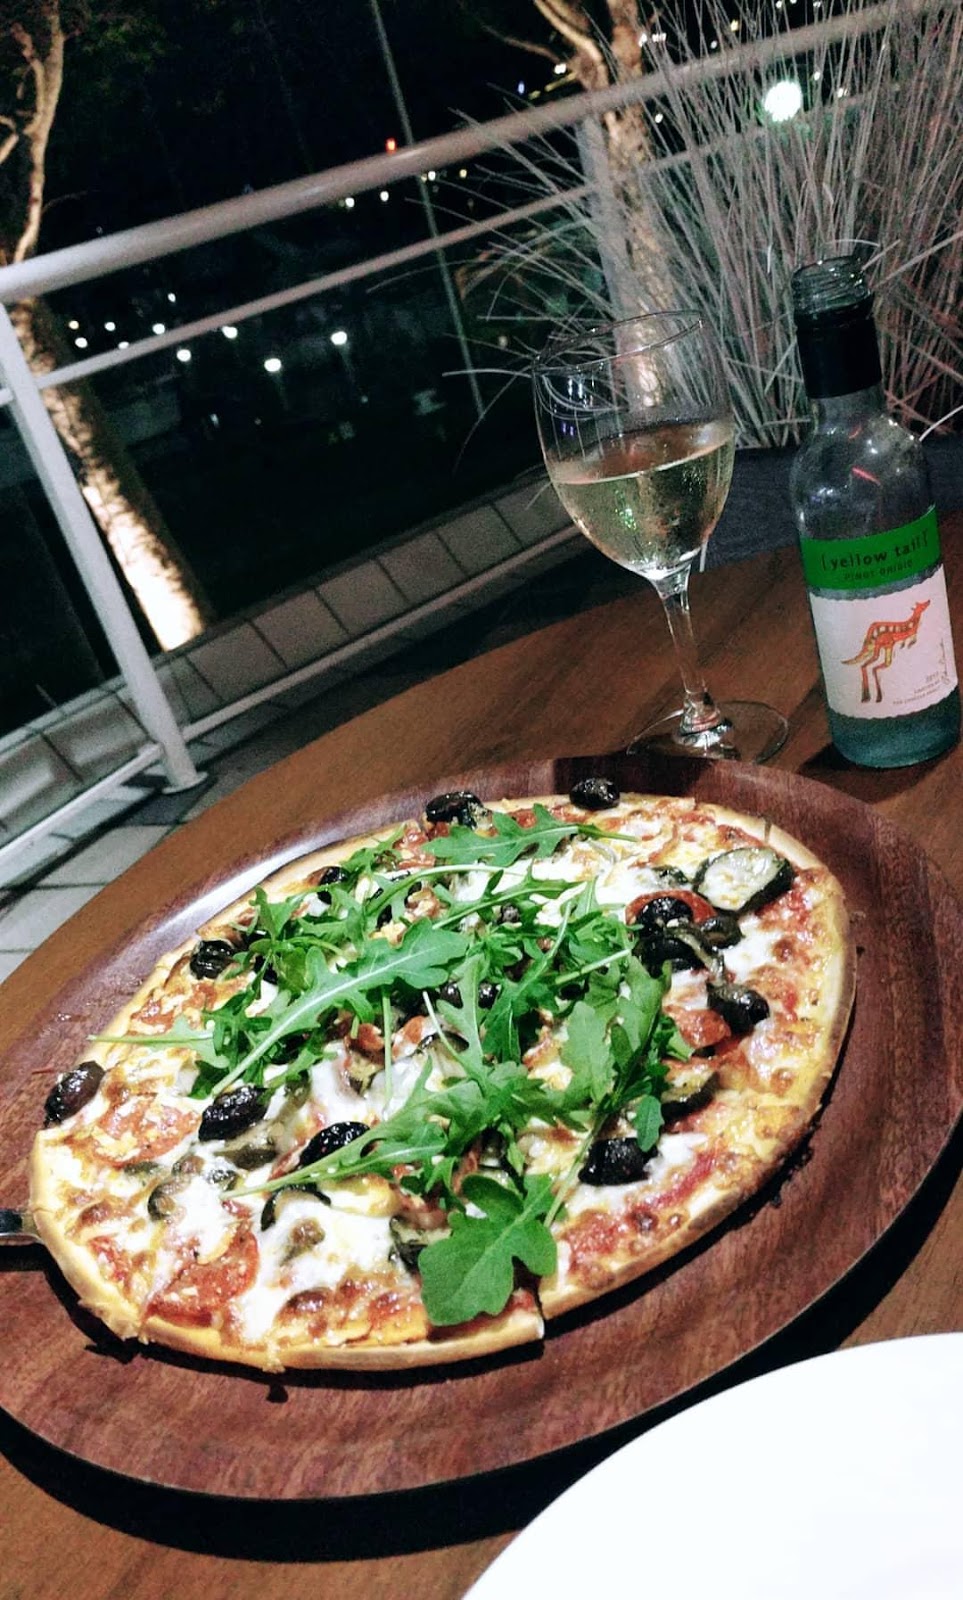 The Wood Oven | restaurant | Shop 19/8 Teramby Rd, Nelson Bay NSW 2315, Australia | 0249844800 OR +61 2 4984 4800